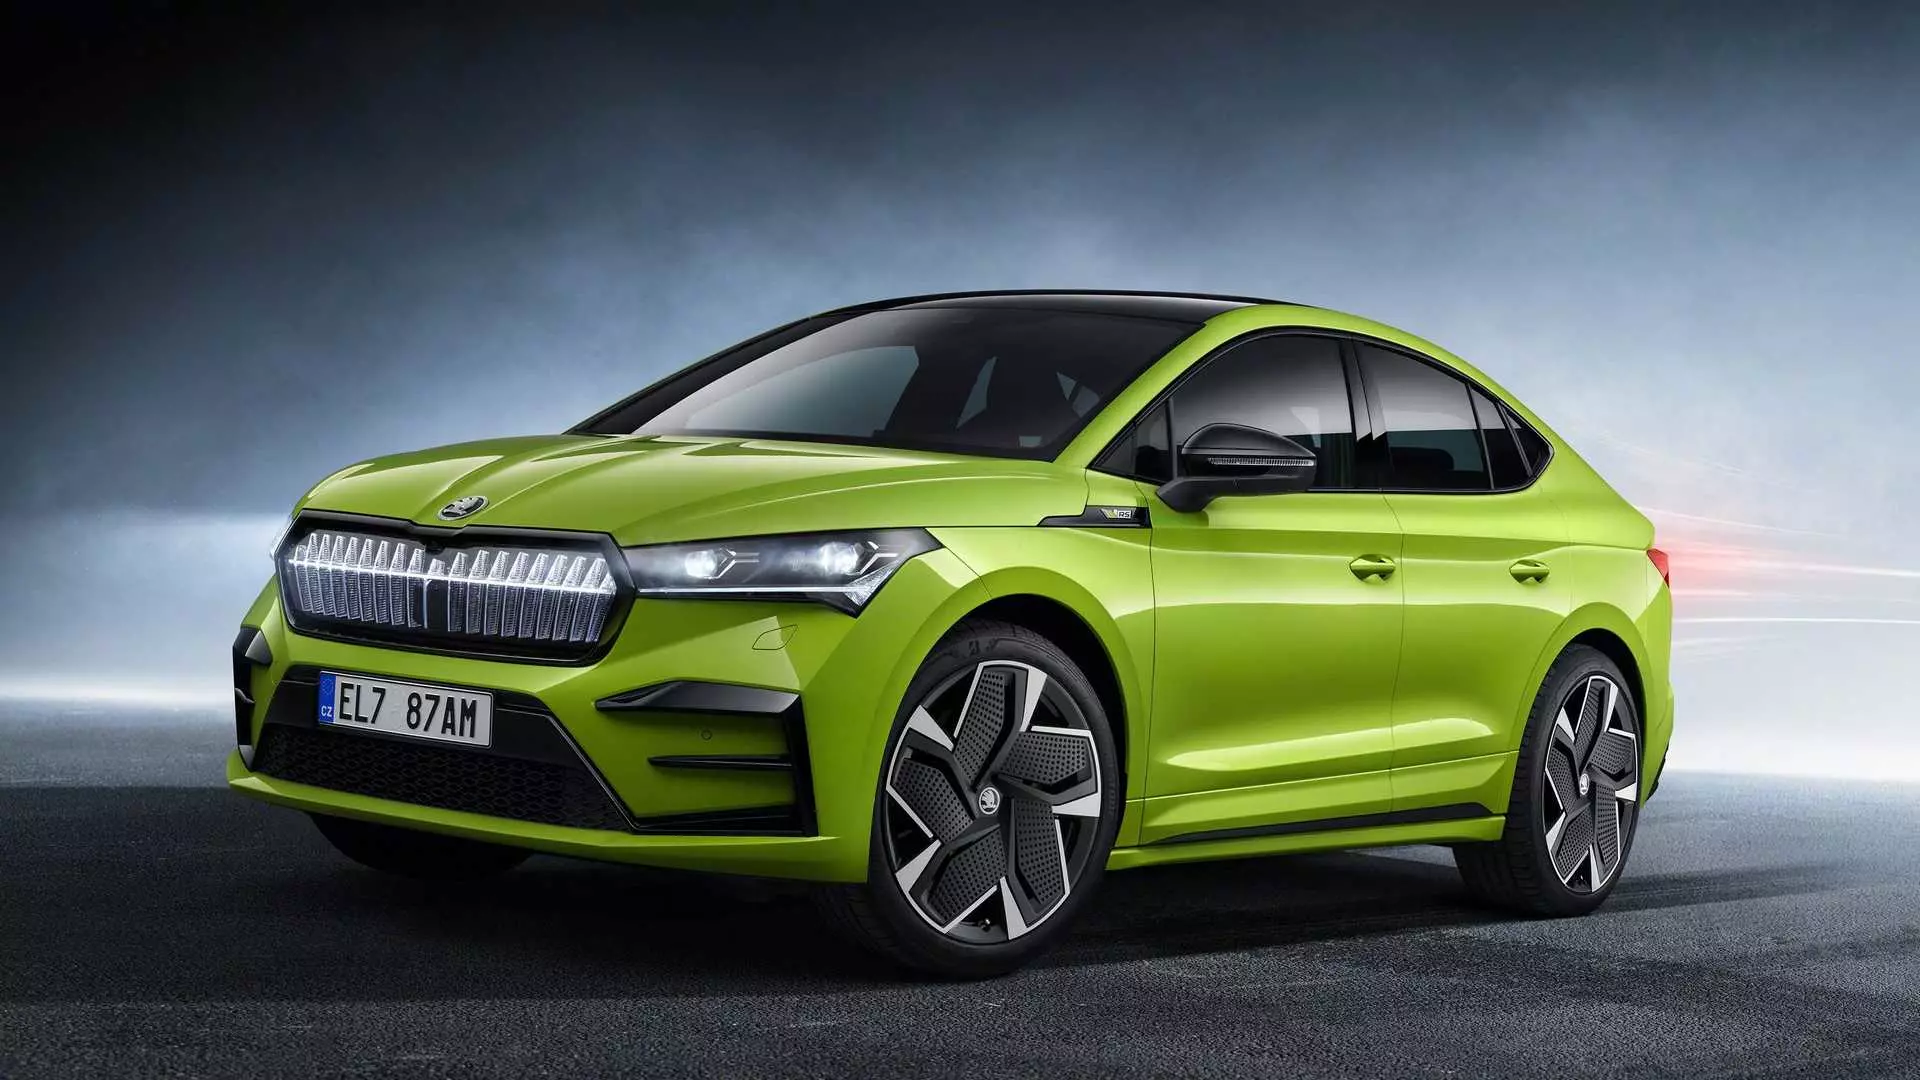 2022 Skoda Enyaq Coupe iV Features and Price Announced